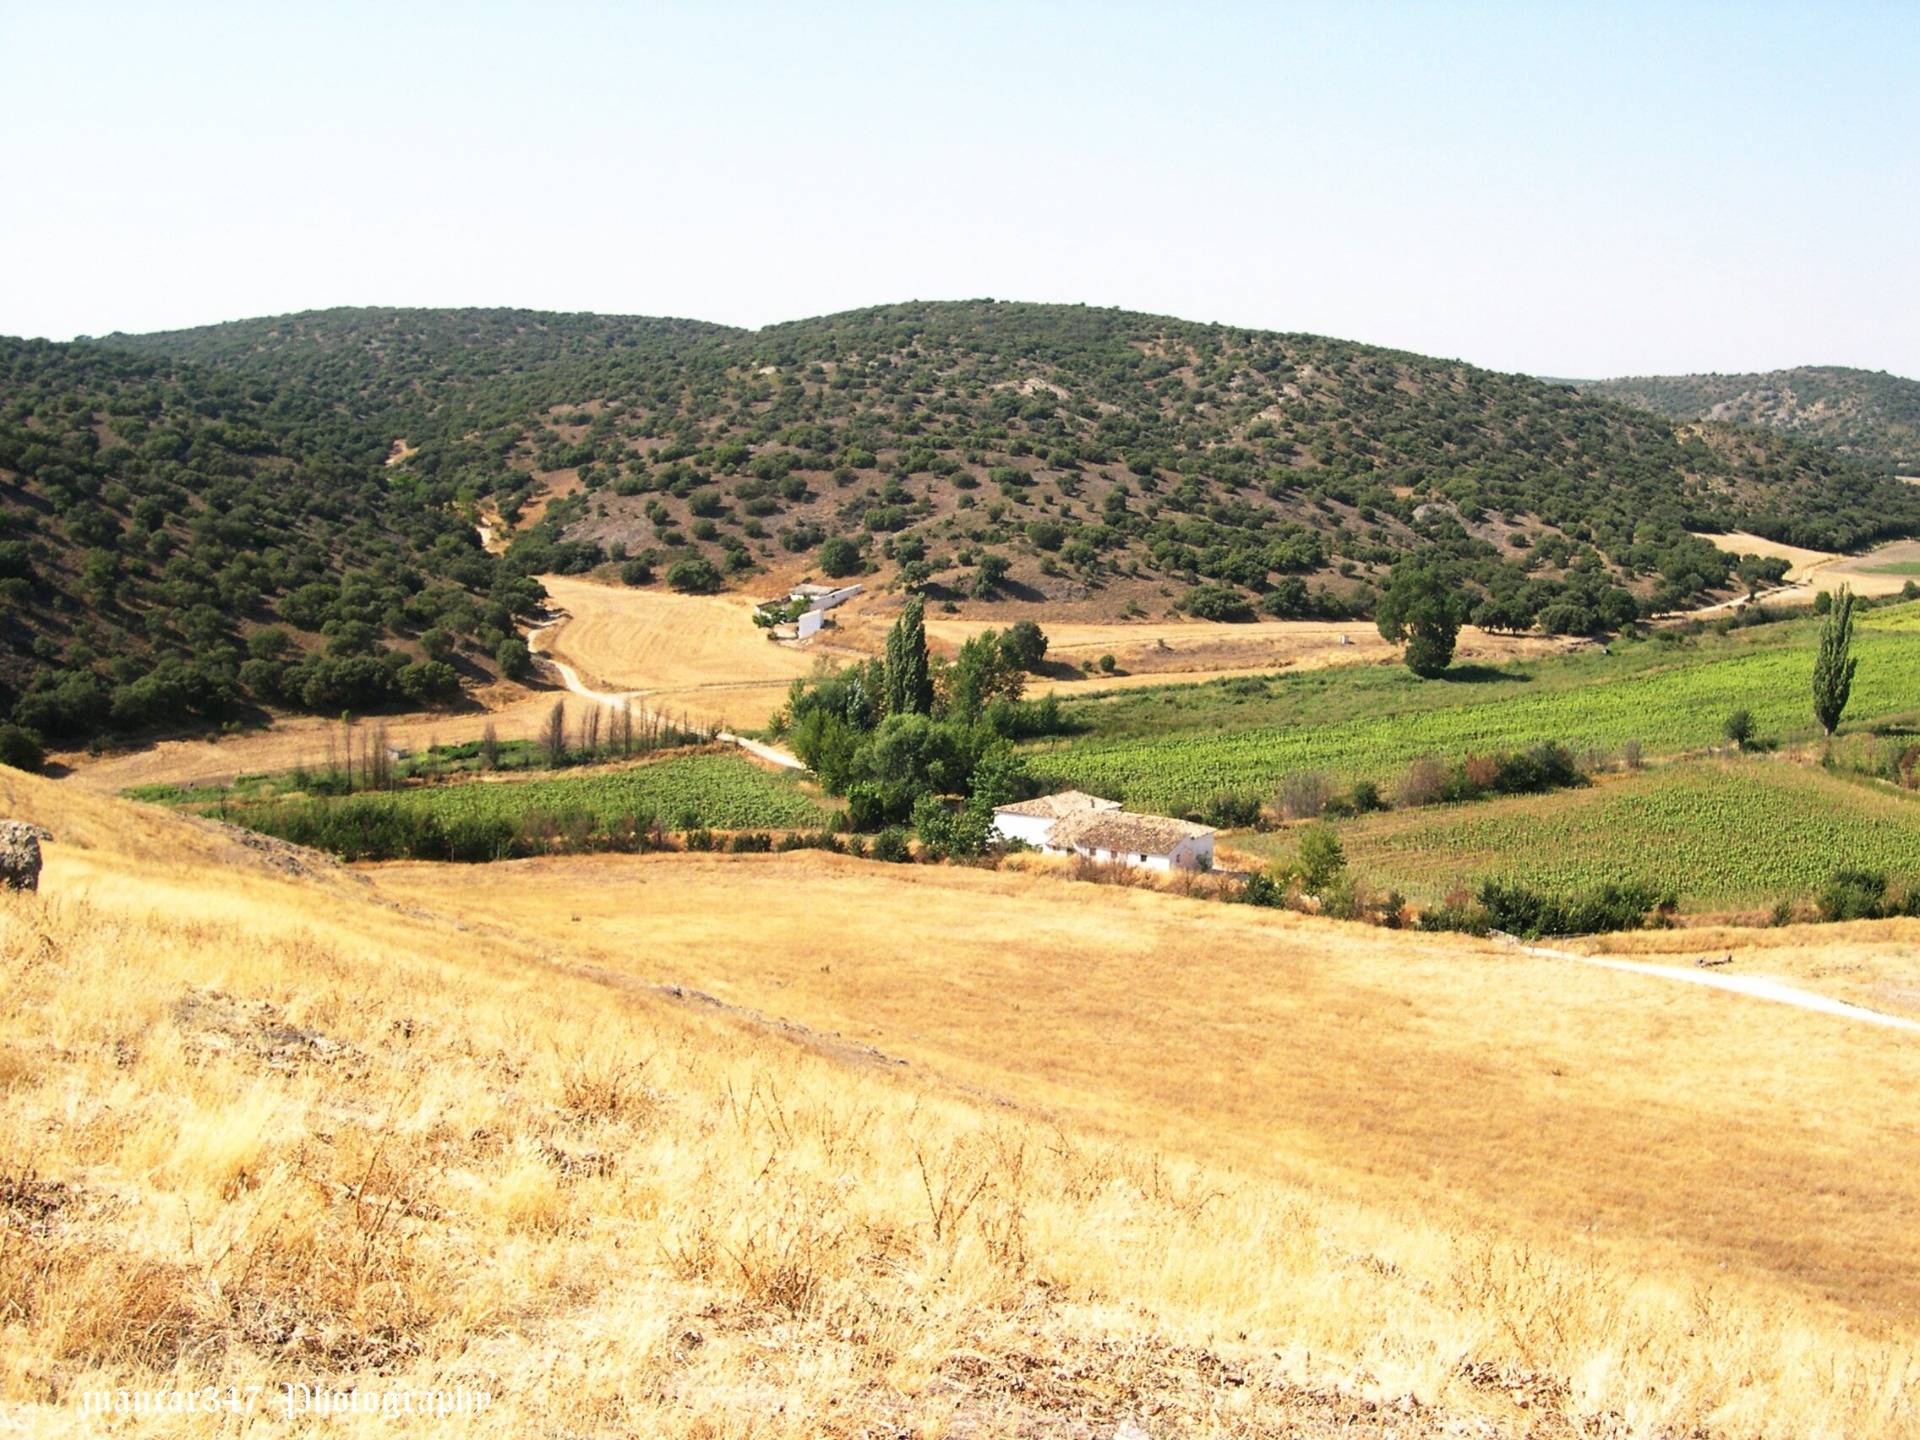 Panoramic view of some houses in Saelices